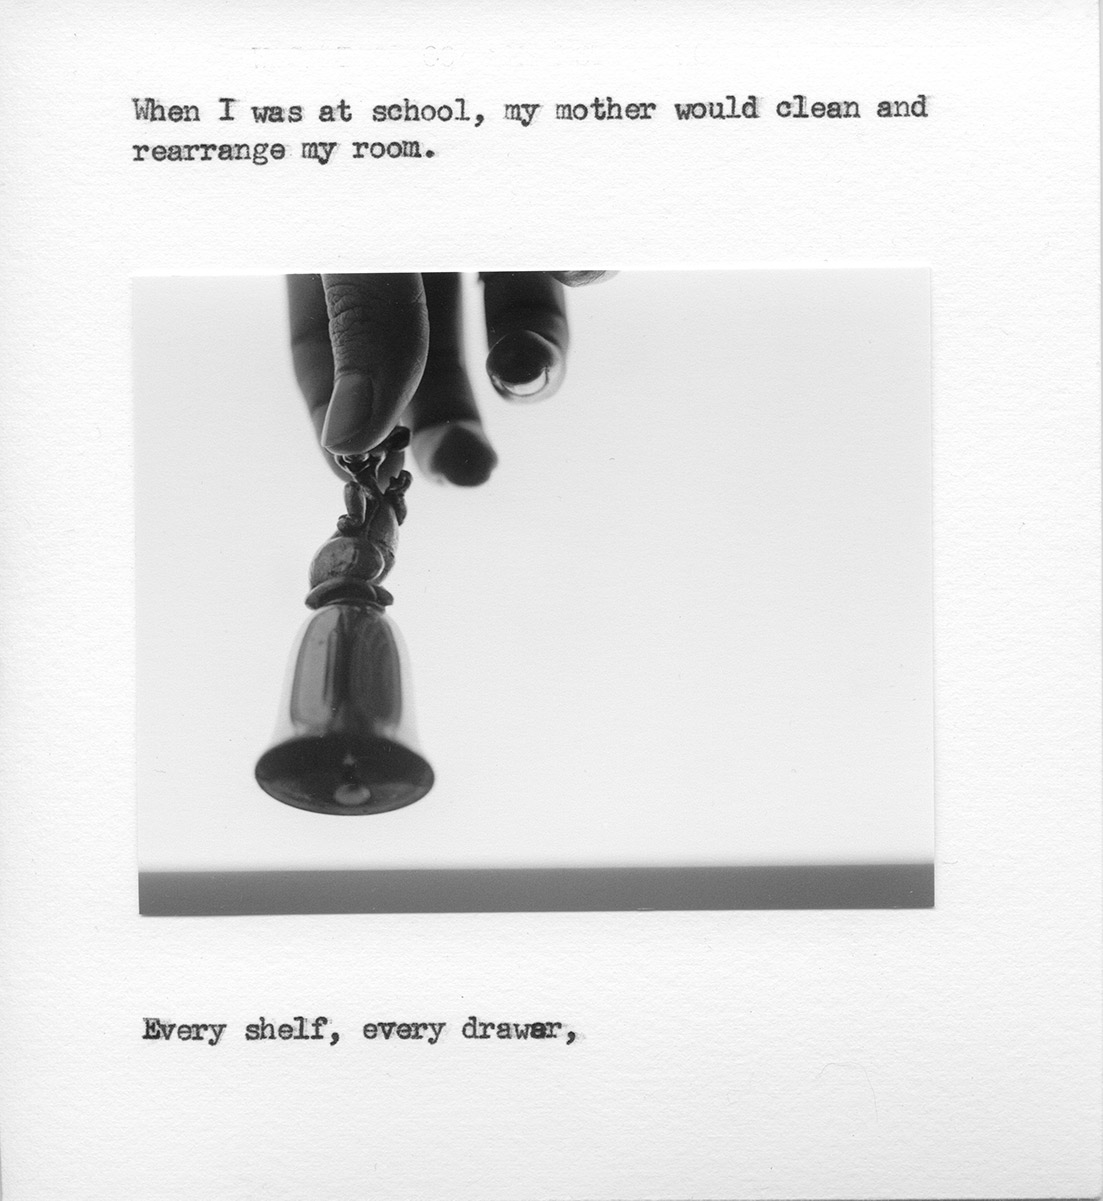 A metal figurine held in the air between two fingers. The text reads: “When I was at school, my mother would clean and rearrange my room. Every shelf, every drawer”